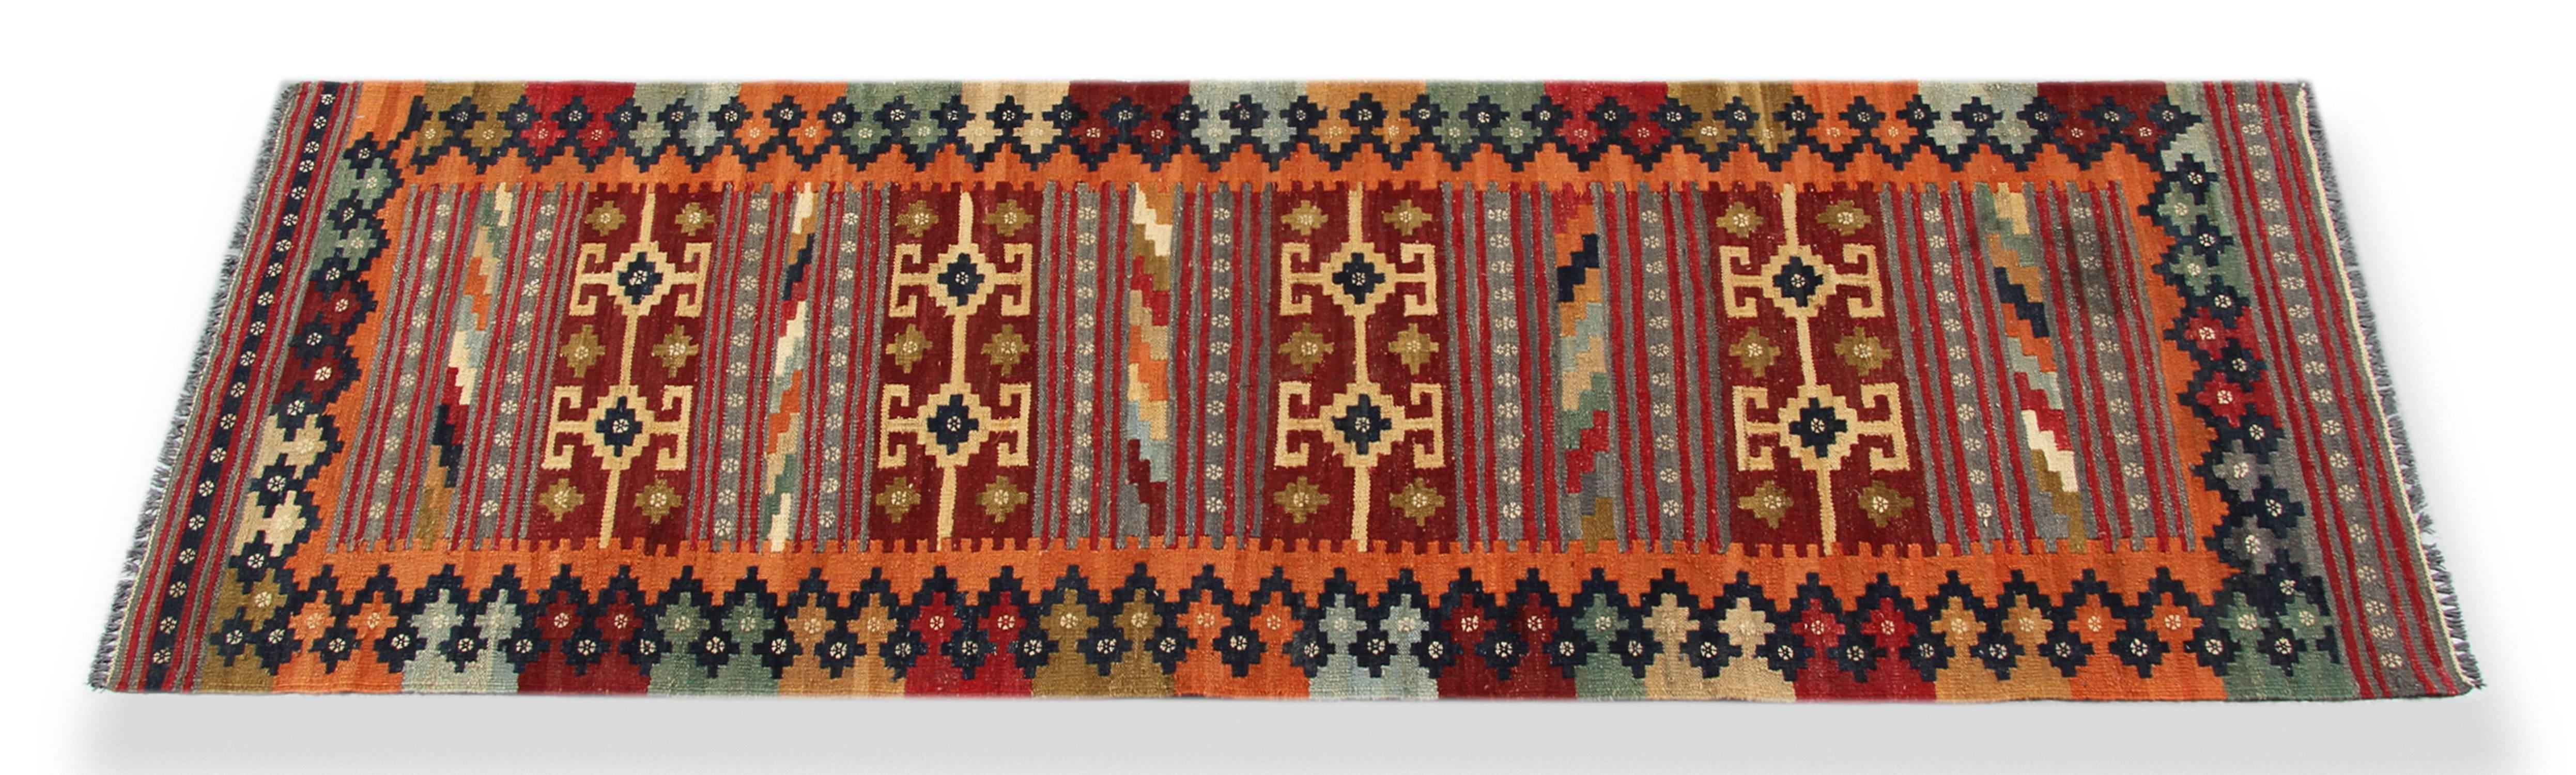 This geometric runner rug has been handmade in Afghanistan by Uzbek and Turkmen tribes by using high-quality wool and cotton. Also, the dyes are organic. The geometric designs are inspired by the Persian Qashqai Tribe and are multicolored.